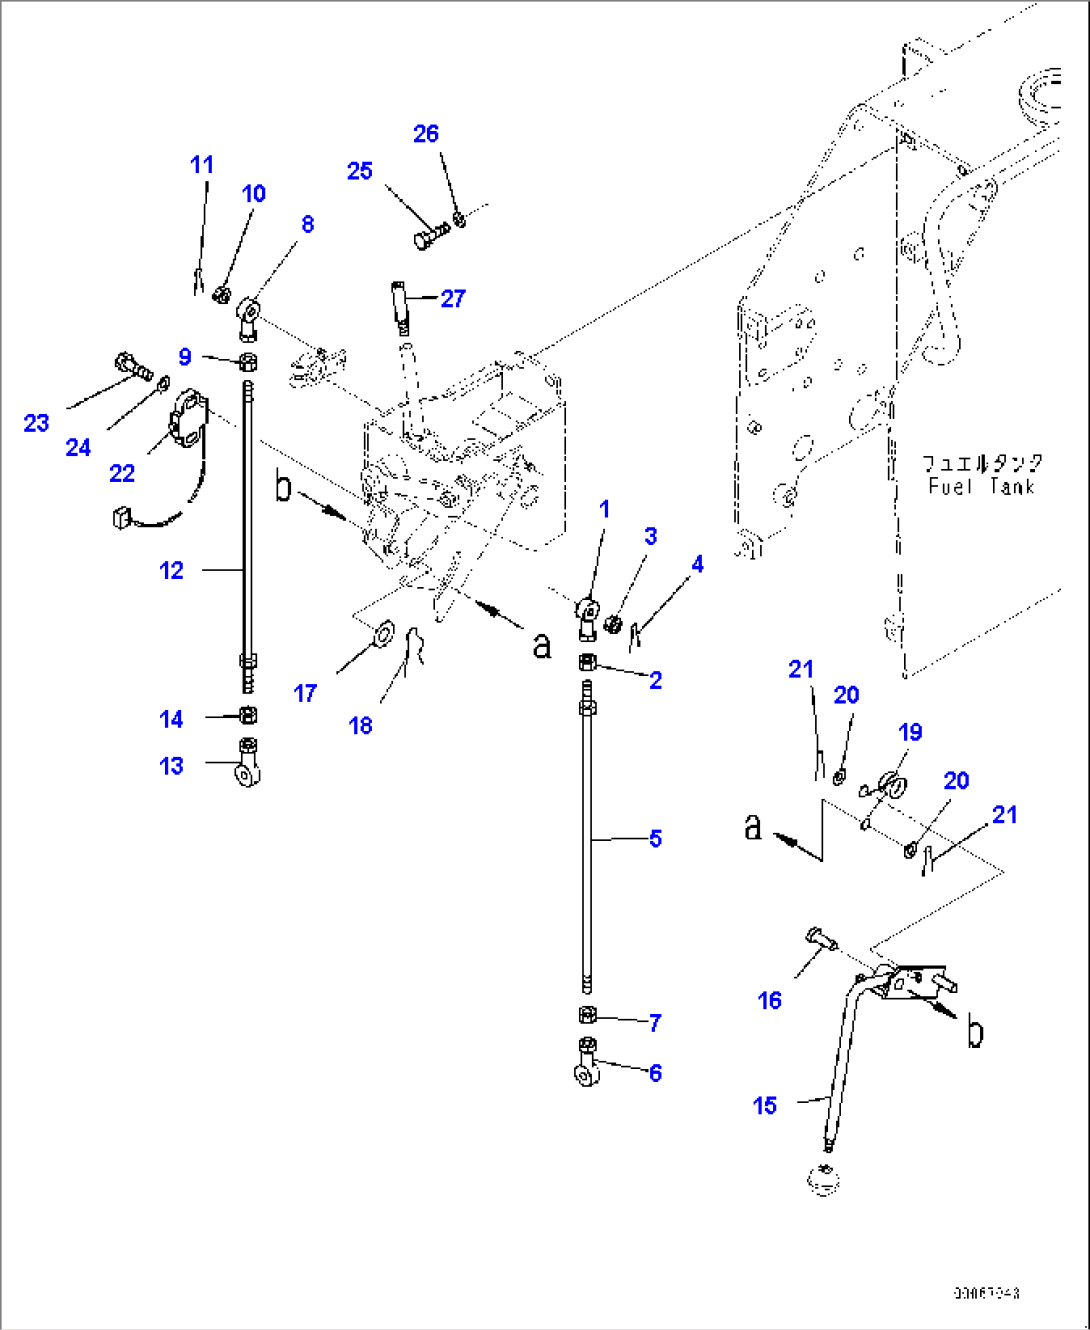 Fuel Tank and Controls, Lock Lever (#90210-)